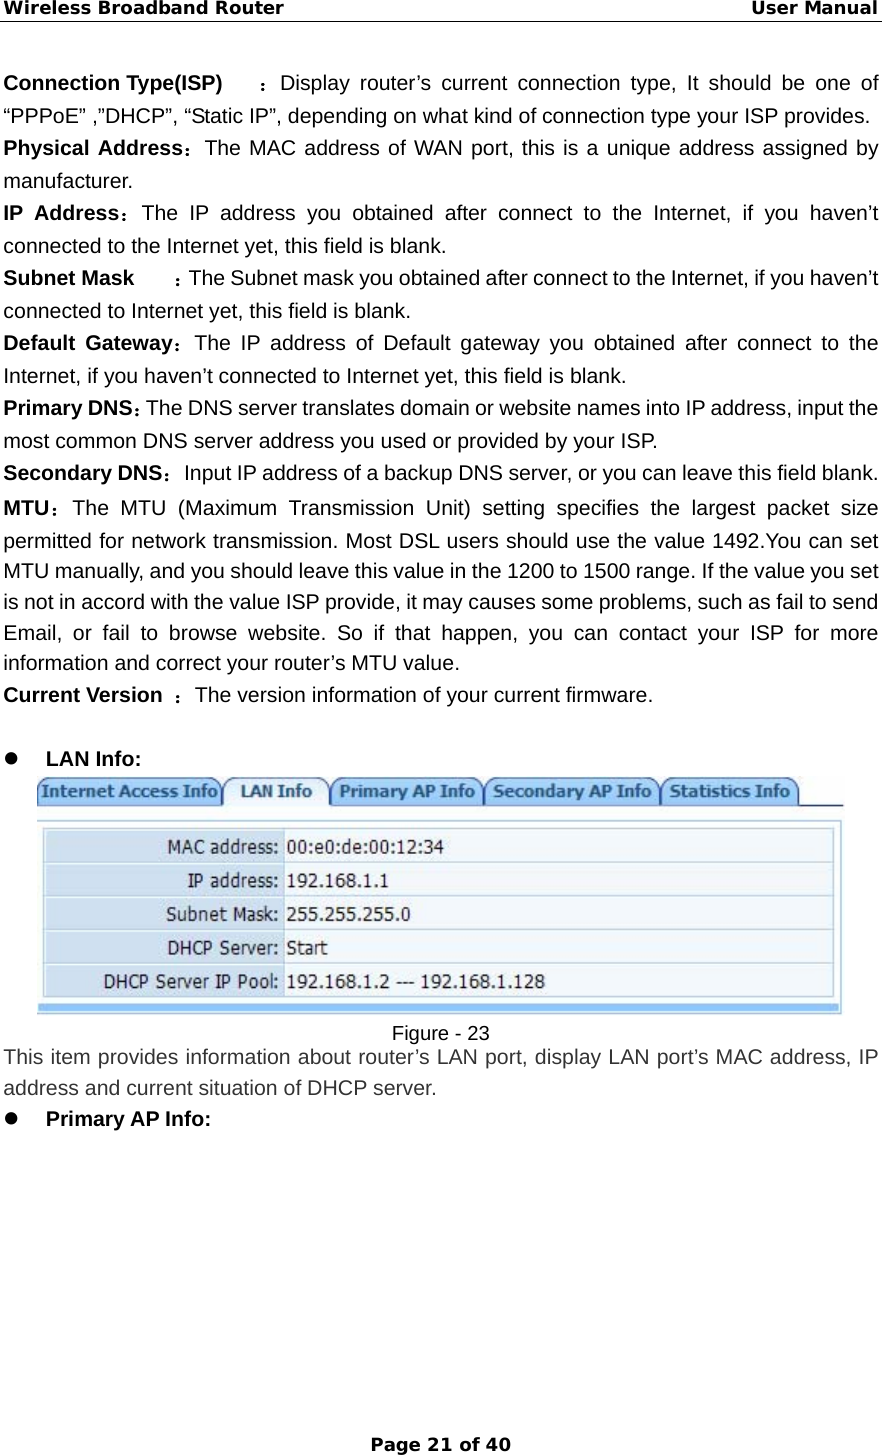 Wireless Broadband Router                                                   User Manual Page 21 of 40 Connection Type(ISP)  ：Display router’s current connection type, It should be one of “PPPoE” ,”DHCP”, “Static IP”, depending on what kind of connection type your ISP provides.   Physical Address：The MAC address of WAN port, this is a unique address assigned by manufacturer. IP Address：The IP address you obtained after connect to the Internet, if you haven’t connected to the Internet yet, this field is blank.   Subnet Mask  ：The Subnet mask you obtained after connect to the Internet, if you haven’t connected to Internet yet, this field is blank.   Default Gateway：The IP address of Default gateway you obtained after connect to the Internet, if you haven’t connected to Internet yet, this field is blank.   Primary DNS：The DNS server translates domain or website names into IP address, input the most common DNS server address you used or provided by your ISP. Secondary DNS：Input IP address of a backup DNS server, or you can leave this field blank. MTU：The MTU (Maximum Transmission Unit) setting specifies the largest packet size permitted for network transmission. Most DSL users should use the value 1492.You can set MTU manually, and you should leave this value in the 1200 to 1500 range. If the value you set is not in accord with the value ISP provide, it may causes some problems, such as fail to send Email, or fail to browse website. So if that happen, you can contact your ISP for more information and correct your router’s MTU value.   Current Version  ：The version information of your current firmware.  z LAN Info:    Figure - 23 This item provides information about router’s LAN port, display LAN port’s MAC address, IP address and current situation of DHCP server. z Primary AP Info:   